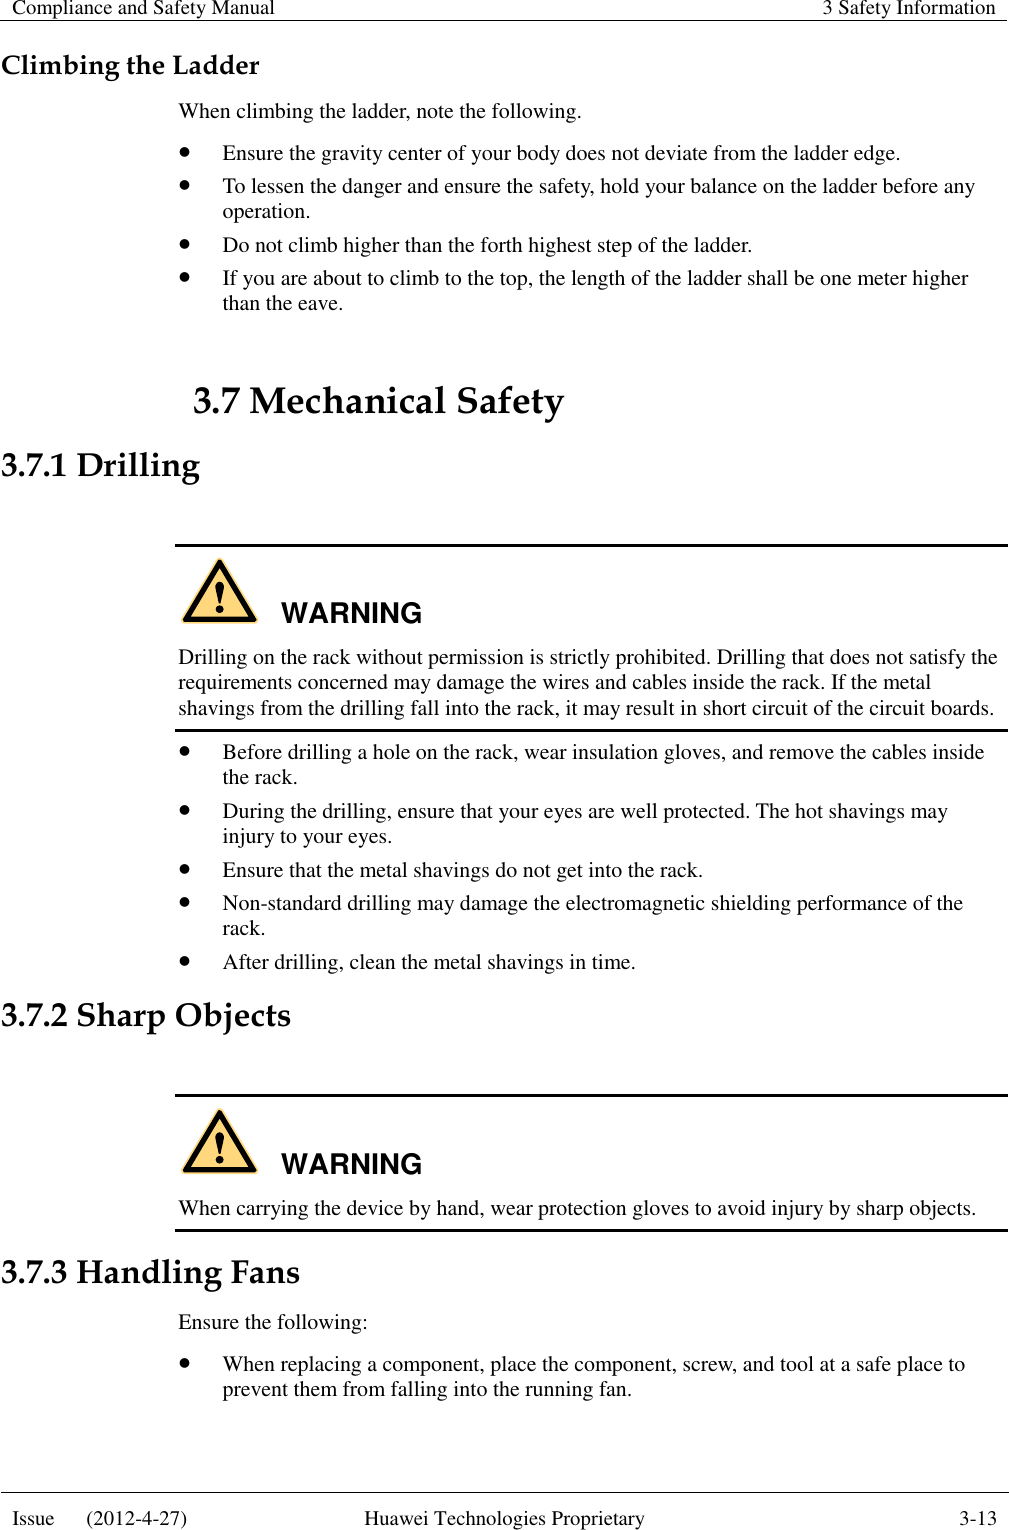 Compliance and Safety Manual 3 Safety Information  Issue      (2012-4-27) Huawei Technologies Proprietary 3-13  Climbing the Ladder When climbing the ladder, note the following.  Ensure the gravity center of your body does not deviate from the ladder edge.  To lessen the danger and ensure the safety, hold your balance on the ladder before any operation.  Do not climb higher than the forth highest step of the ladder.  If you are about to climb to the top, the length of the ladder shall be one meter higher than the eave. 3.7 Mechanical Safety 3.7.1 Drilling  WARNING Drilling on the rack without permission is strictly prohibited. Drilling that does not satisfy the requirements concerned may damage the wires and cables inside the rack. If the metal shavings from the drilling fall into the rack, it may result in short circuit of the circuit boards.  Before drilling a hole on the rack, wear insulation gloves, and remove the cables inside the rack.  During the drilling, ensure that your eyes are well protected. The hot shavings may injury to your eyes.  Ensure that the metal shavings do not get into the rack.  Non-standard drilling may damage the electromagnetic shielding performance of the rack.  After drilling, clean the metal shavings in time. 3.7.2 Sharp Objects  WARNING When carrying the device by hand, wear protection gloves to avoid injury by sharp objects. 3.7.3 Handling Fans Ensure the following:  When replacing a component, place the component, screw, and tool at a safe place to prevent them from falling into the running fan. 